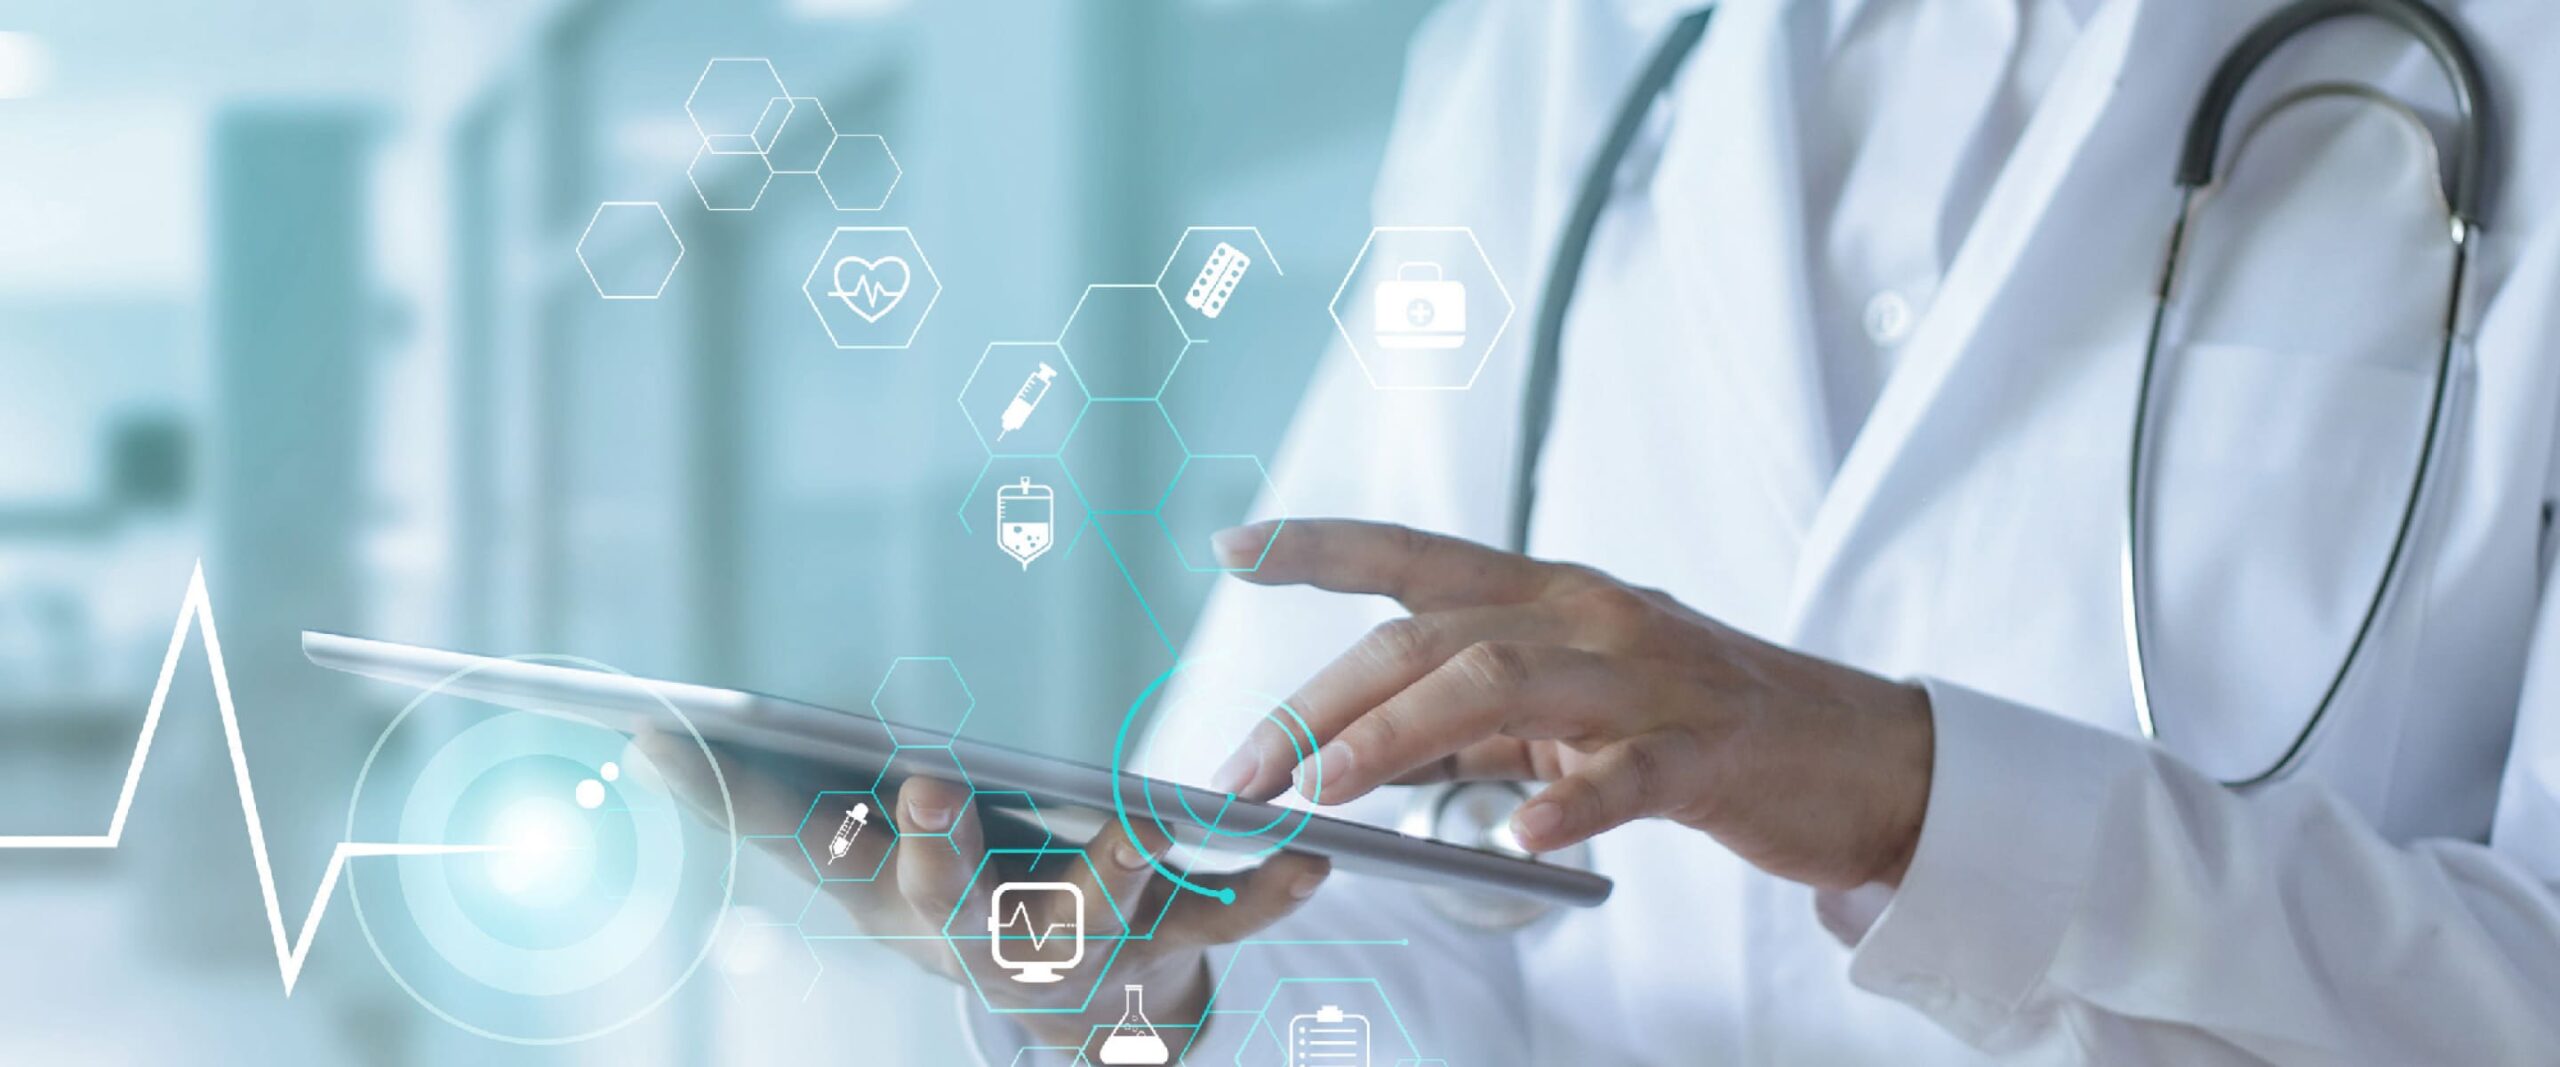 Discovering the role of technology in healthcare and medicine